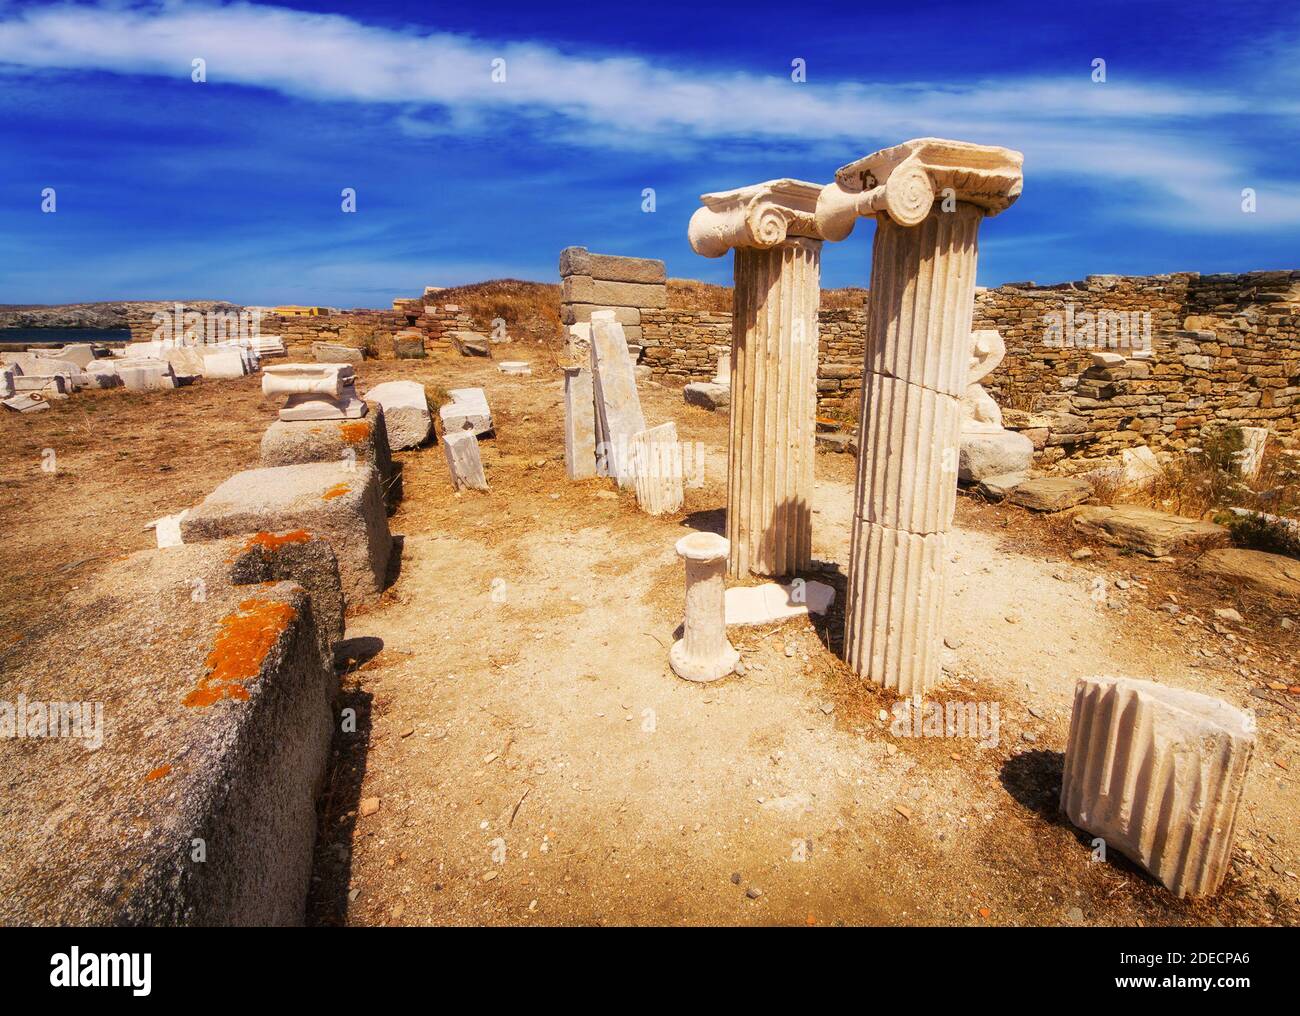 Ancient ruins on the island of Delos, Greece Stock Photo